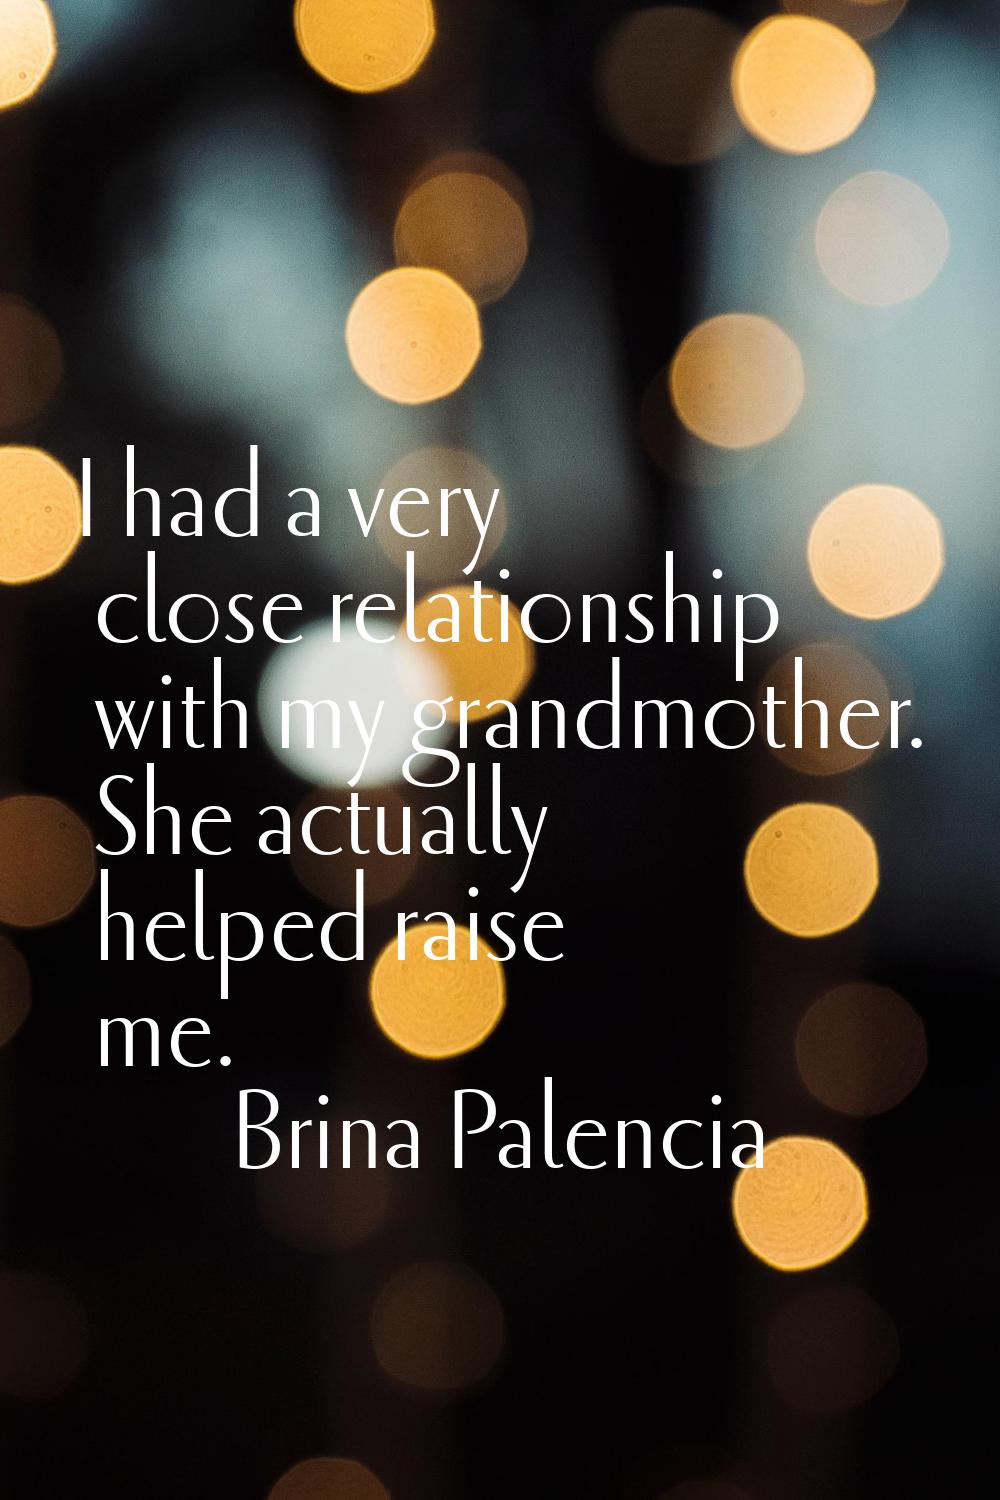 I had a very close relationship with my grandmother. She actually helped raise me.